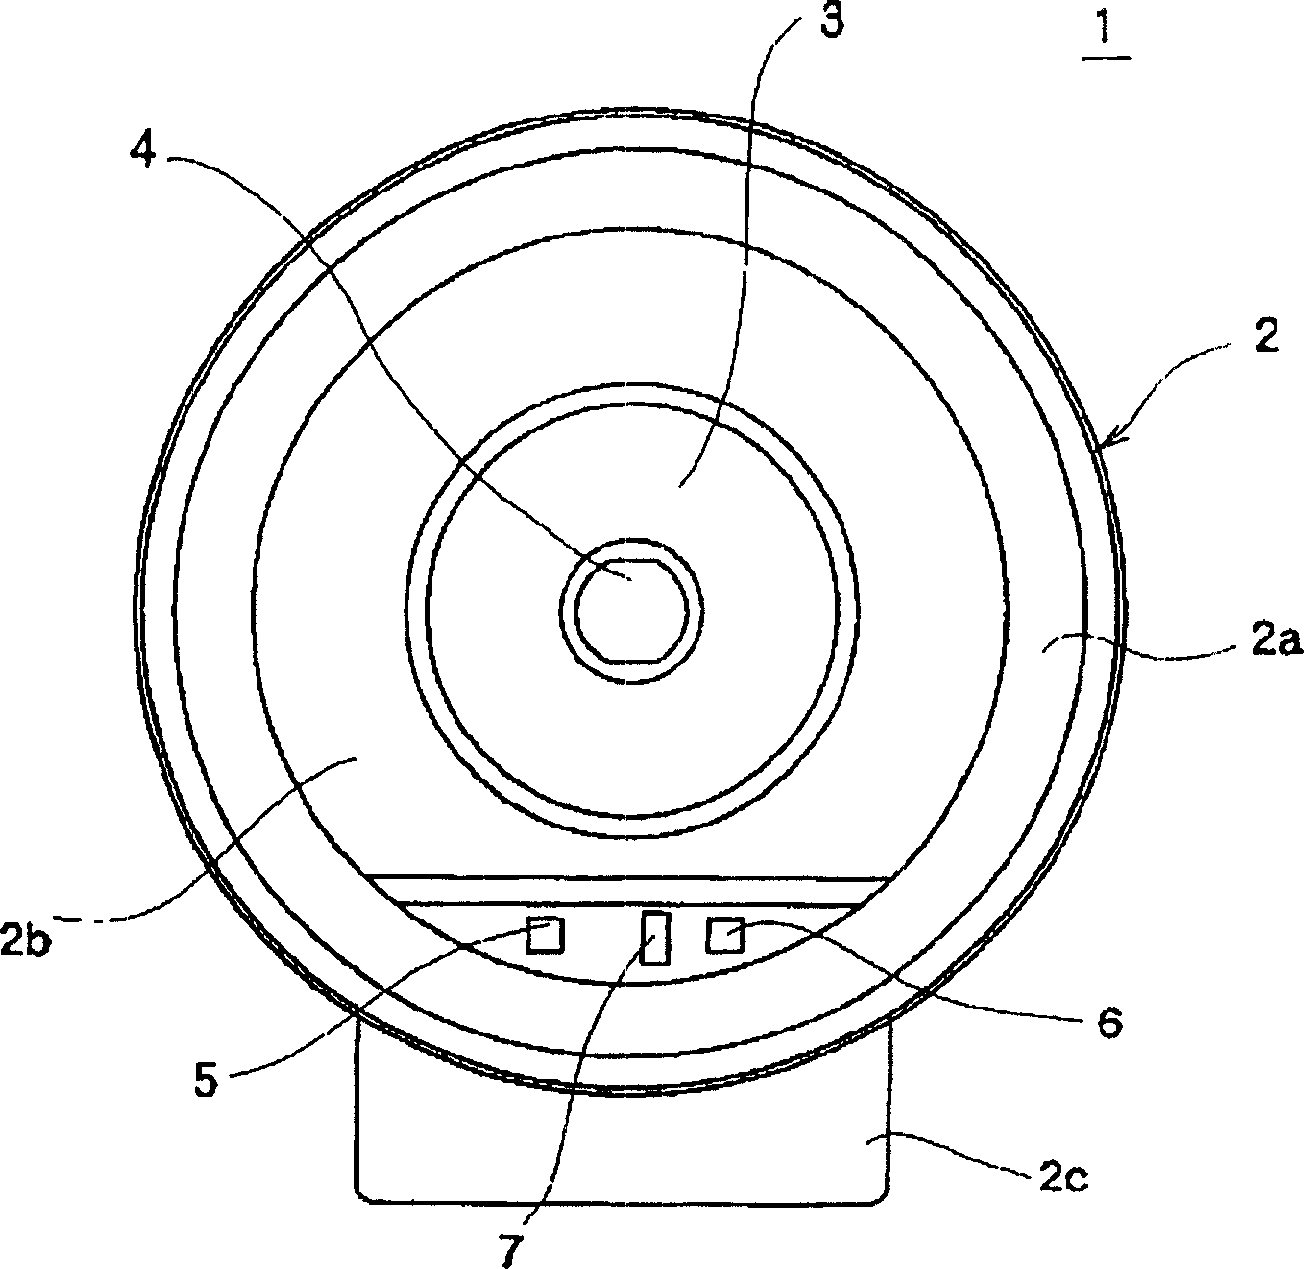 Mounting structure of electronic device